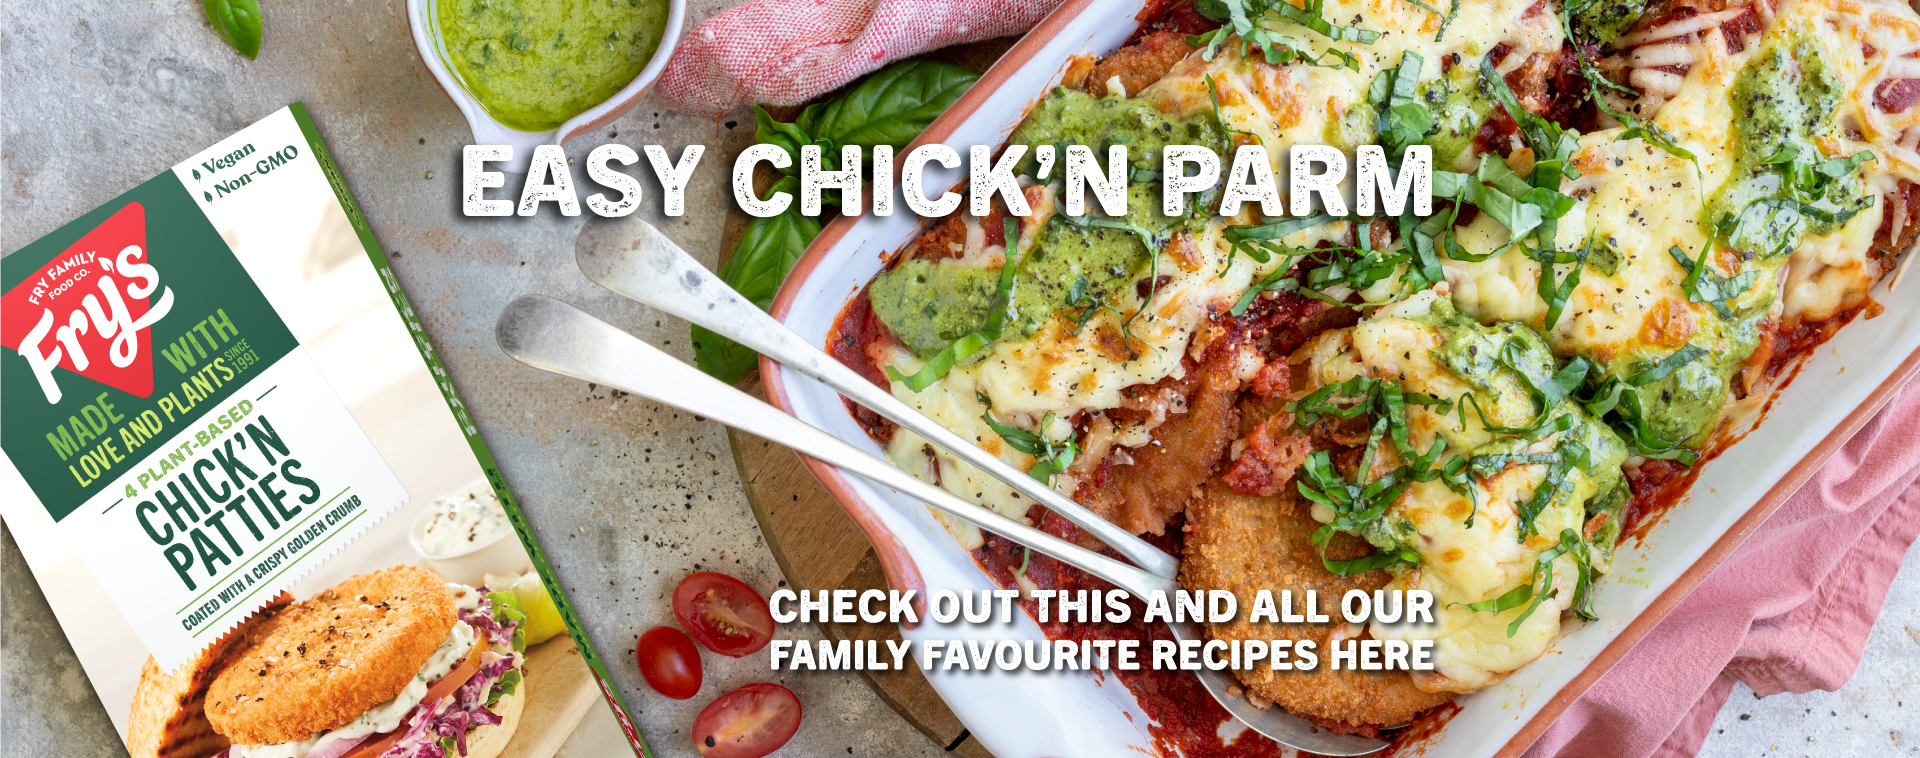 Chick'n parm: Fry Family Food